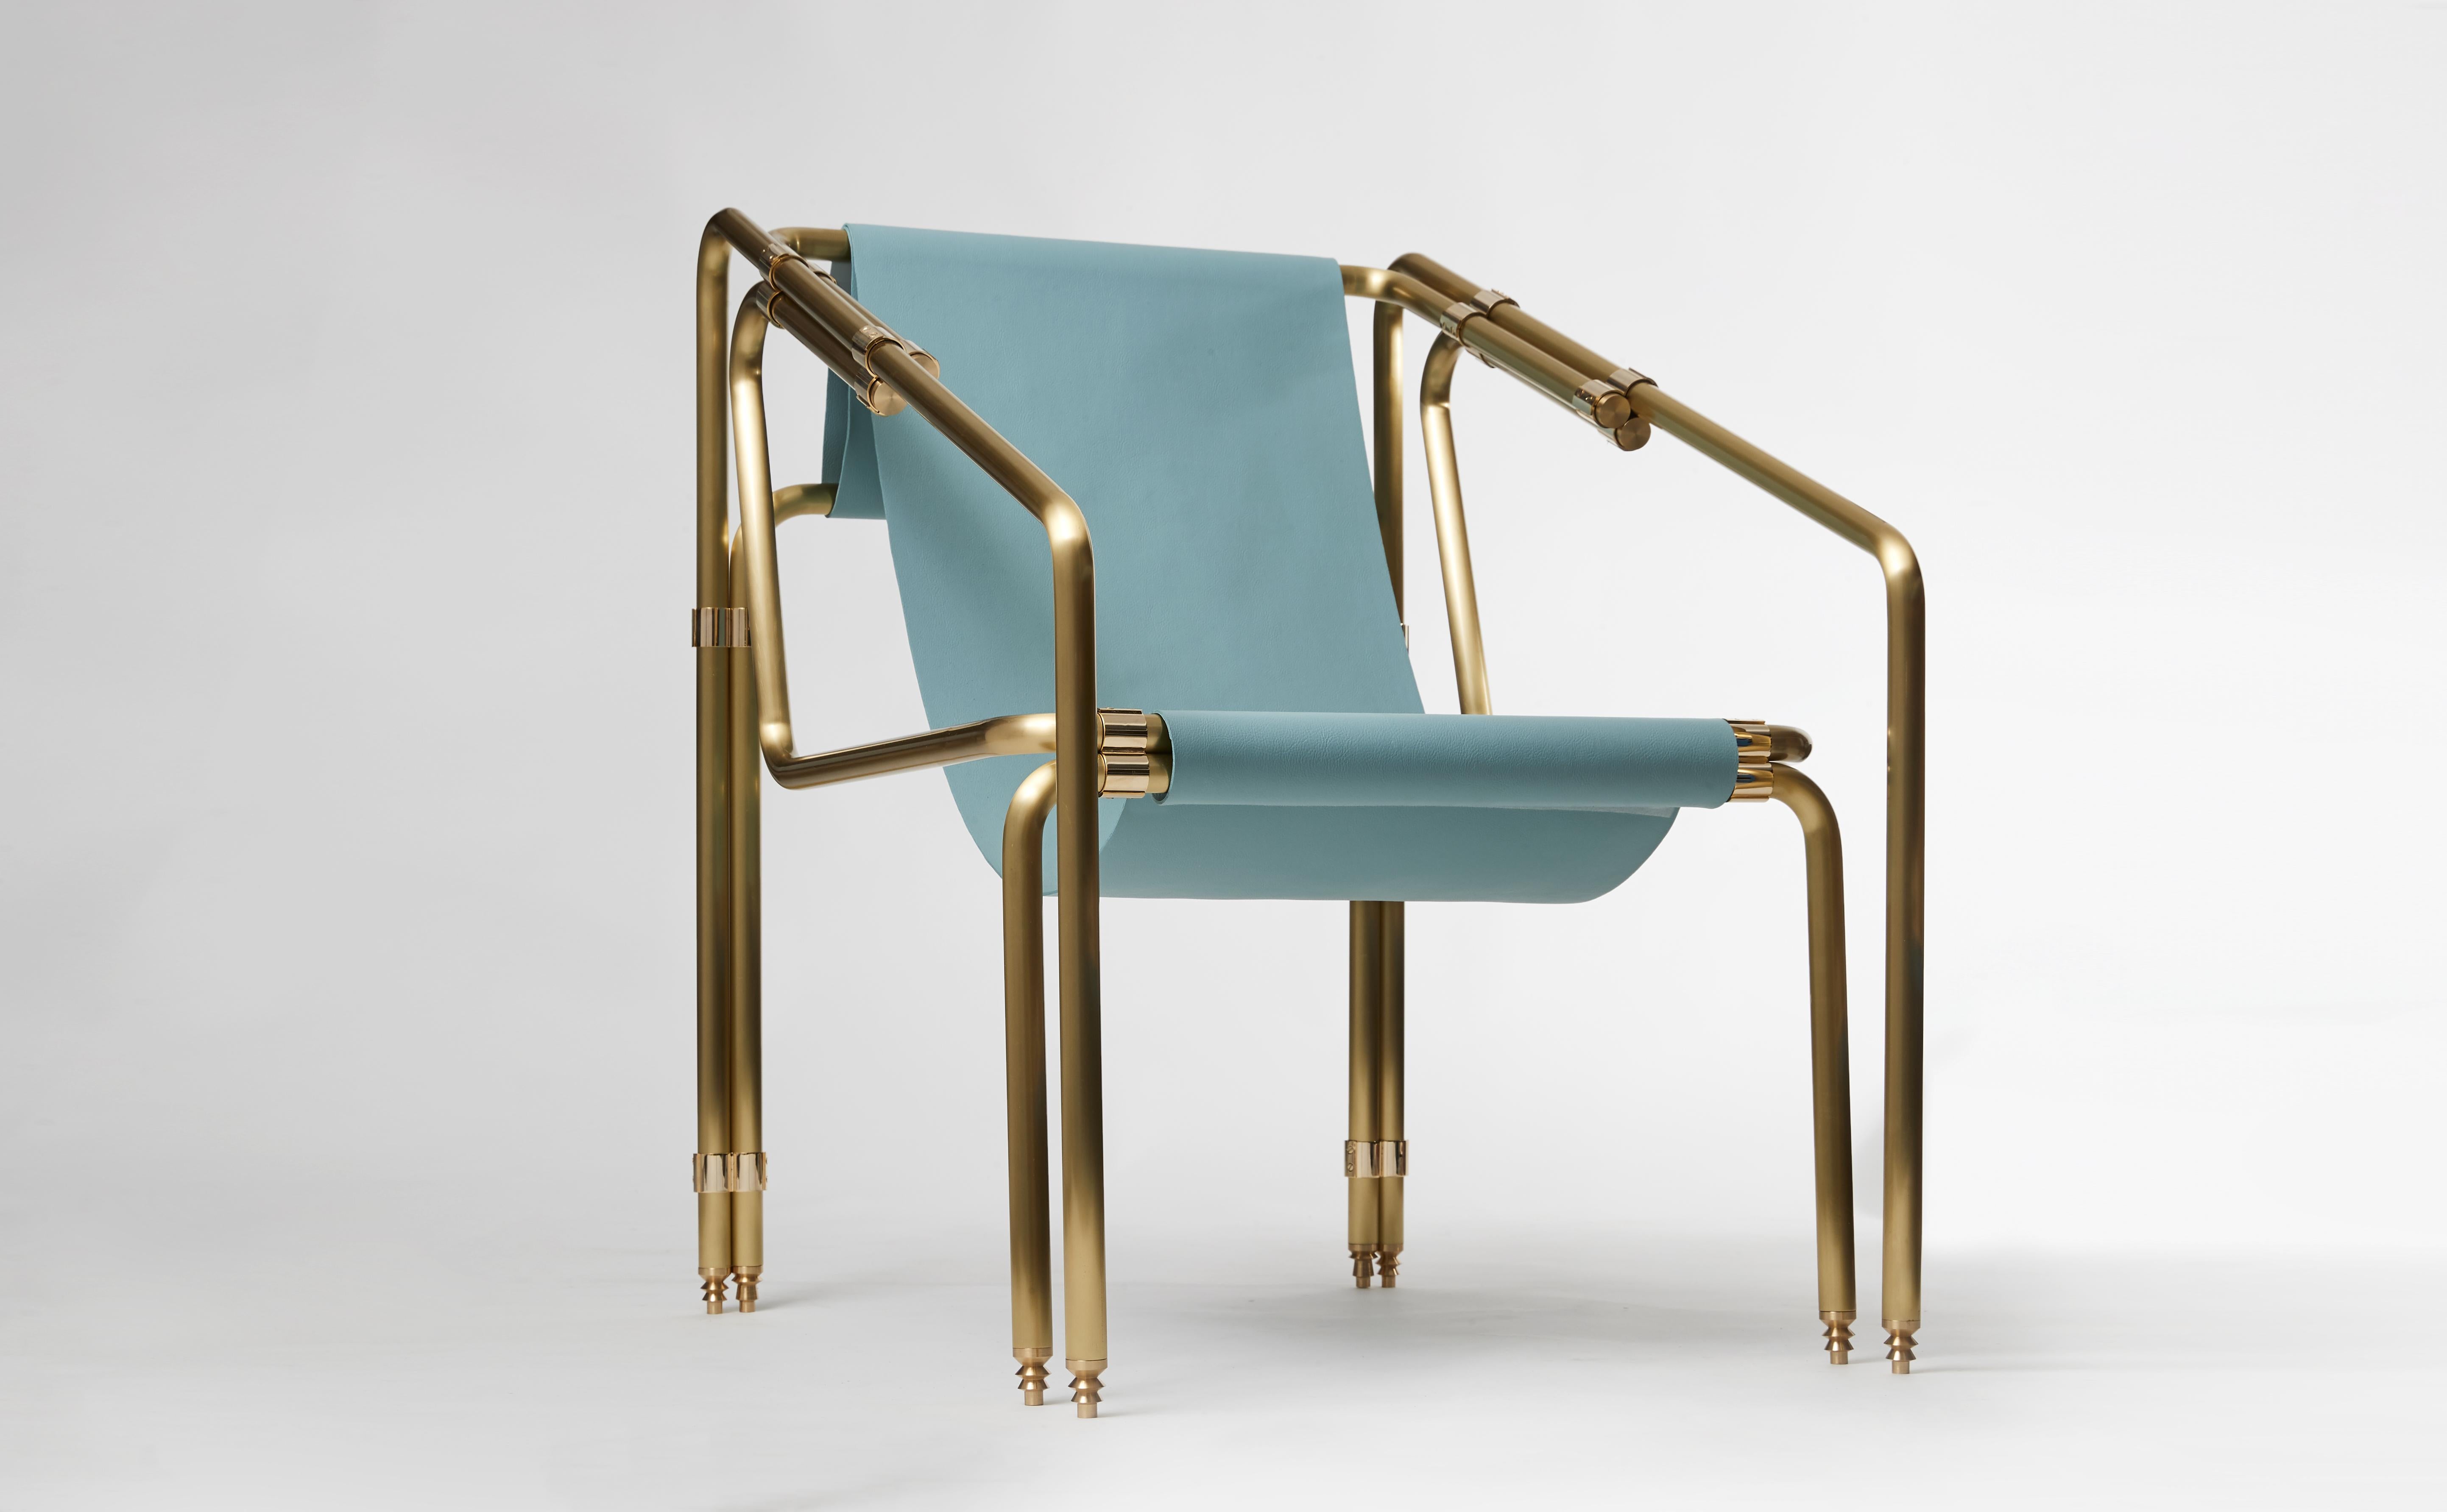 Dorique armchair by Mydriaz
Dimensions: W 61 x D 80 x H 83 cm
Materials: Brass, fabric

Made to order creations are possible.

Our products are handmade in our workshop. Dimensions and finishes may vary slightly from one model to another